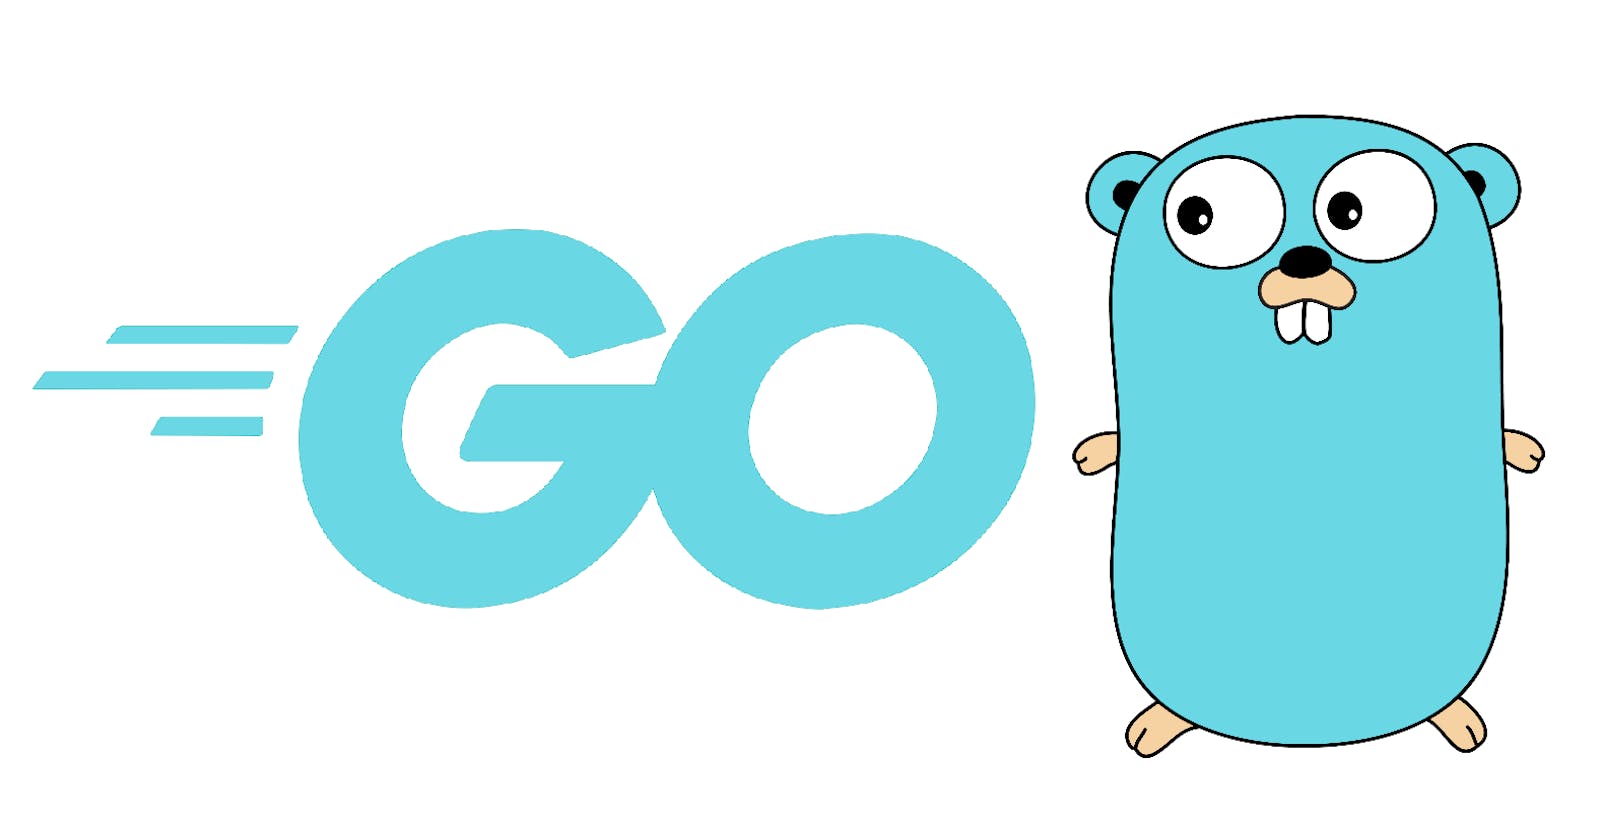 Getting Started with GoLang